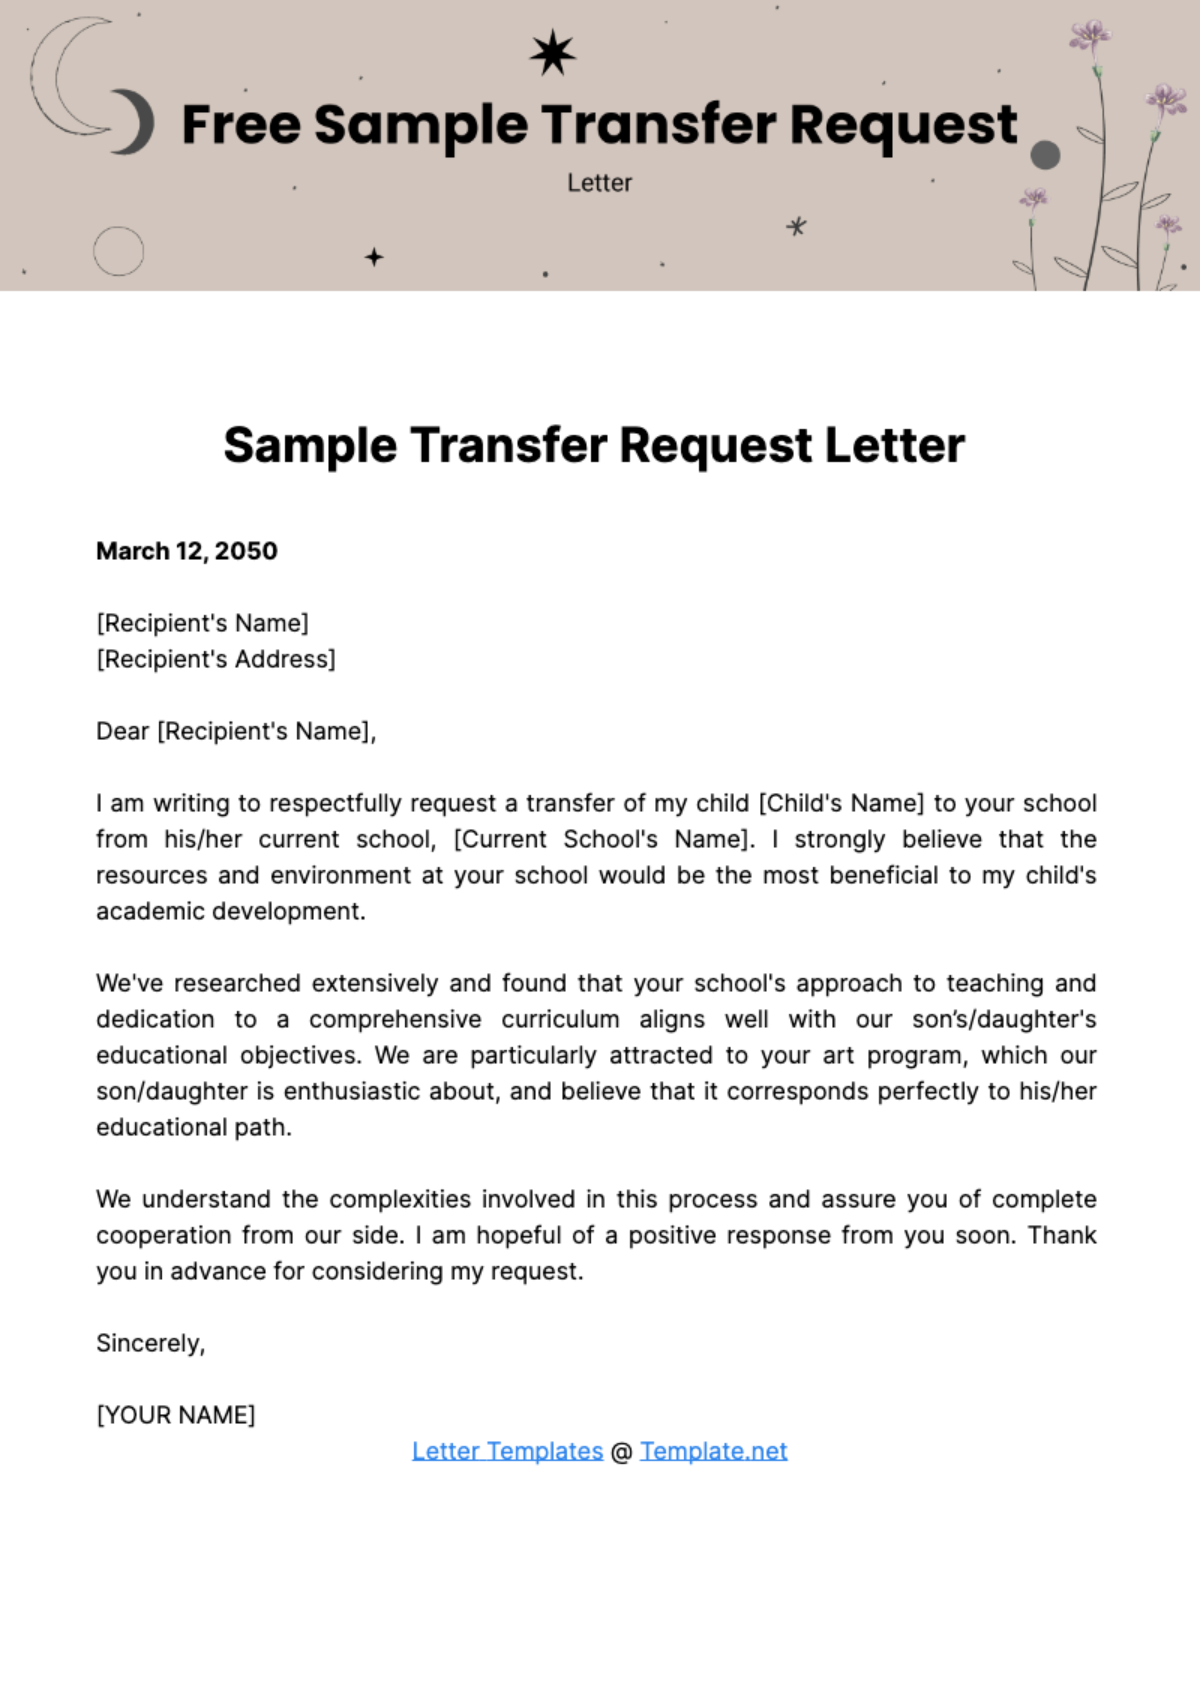 Free Sample Transfer Request Letter Template